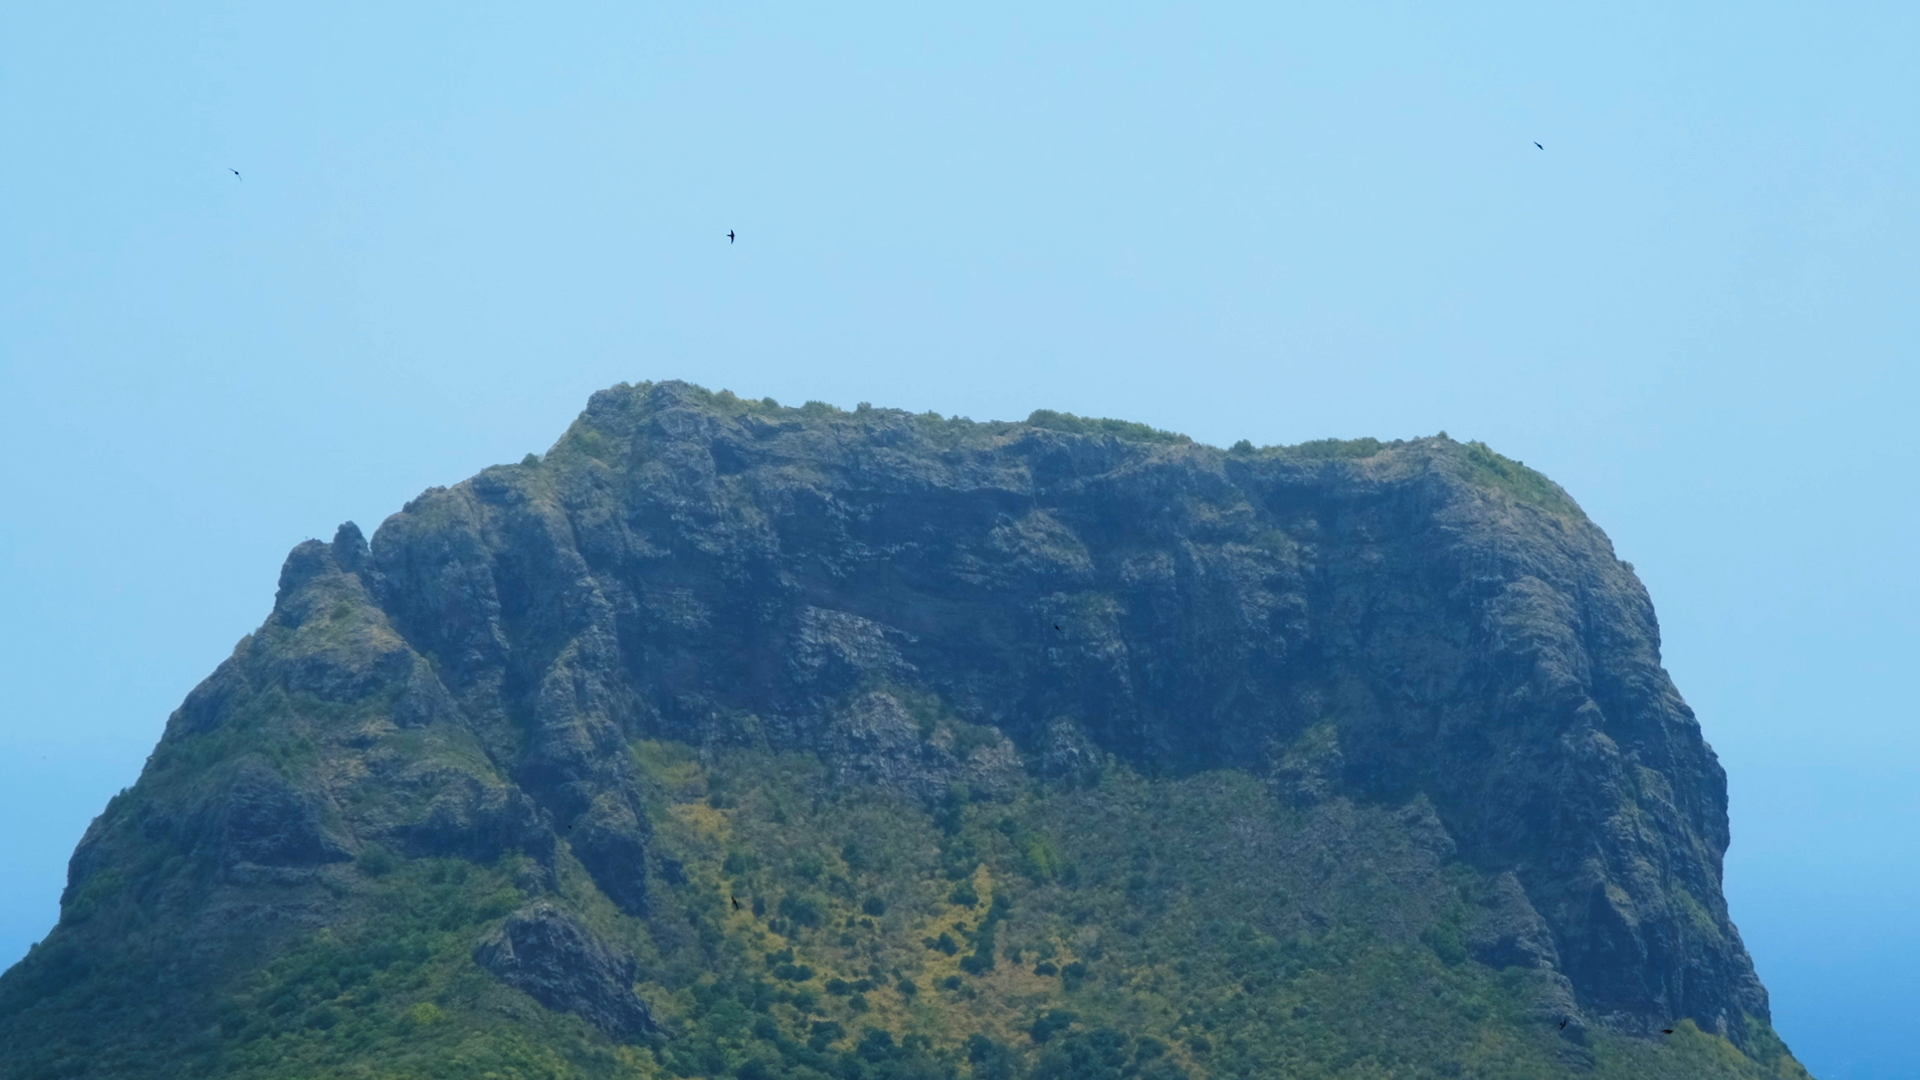 an image of a green verdant rocky hill against a blue sky